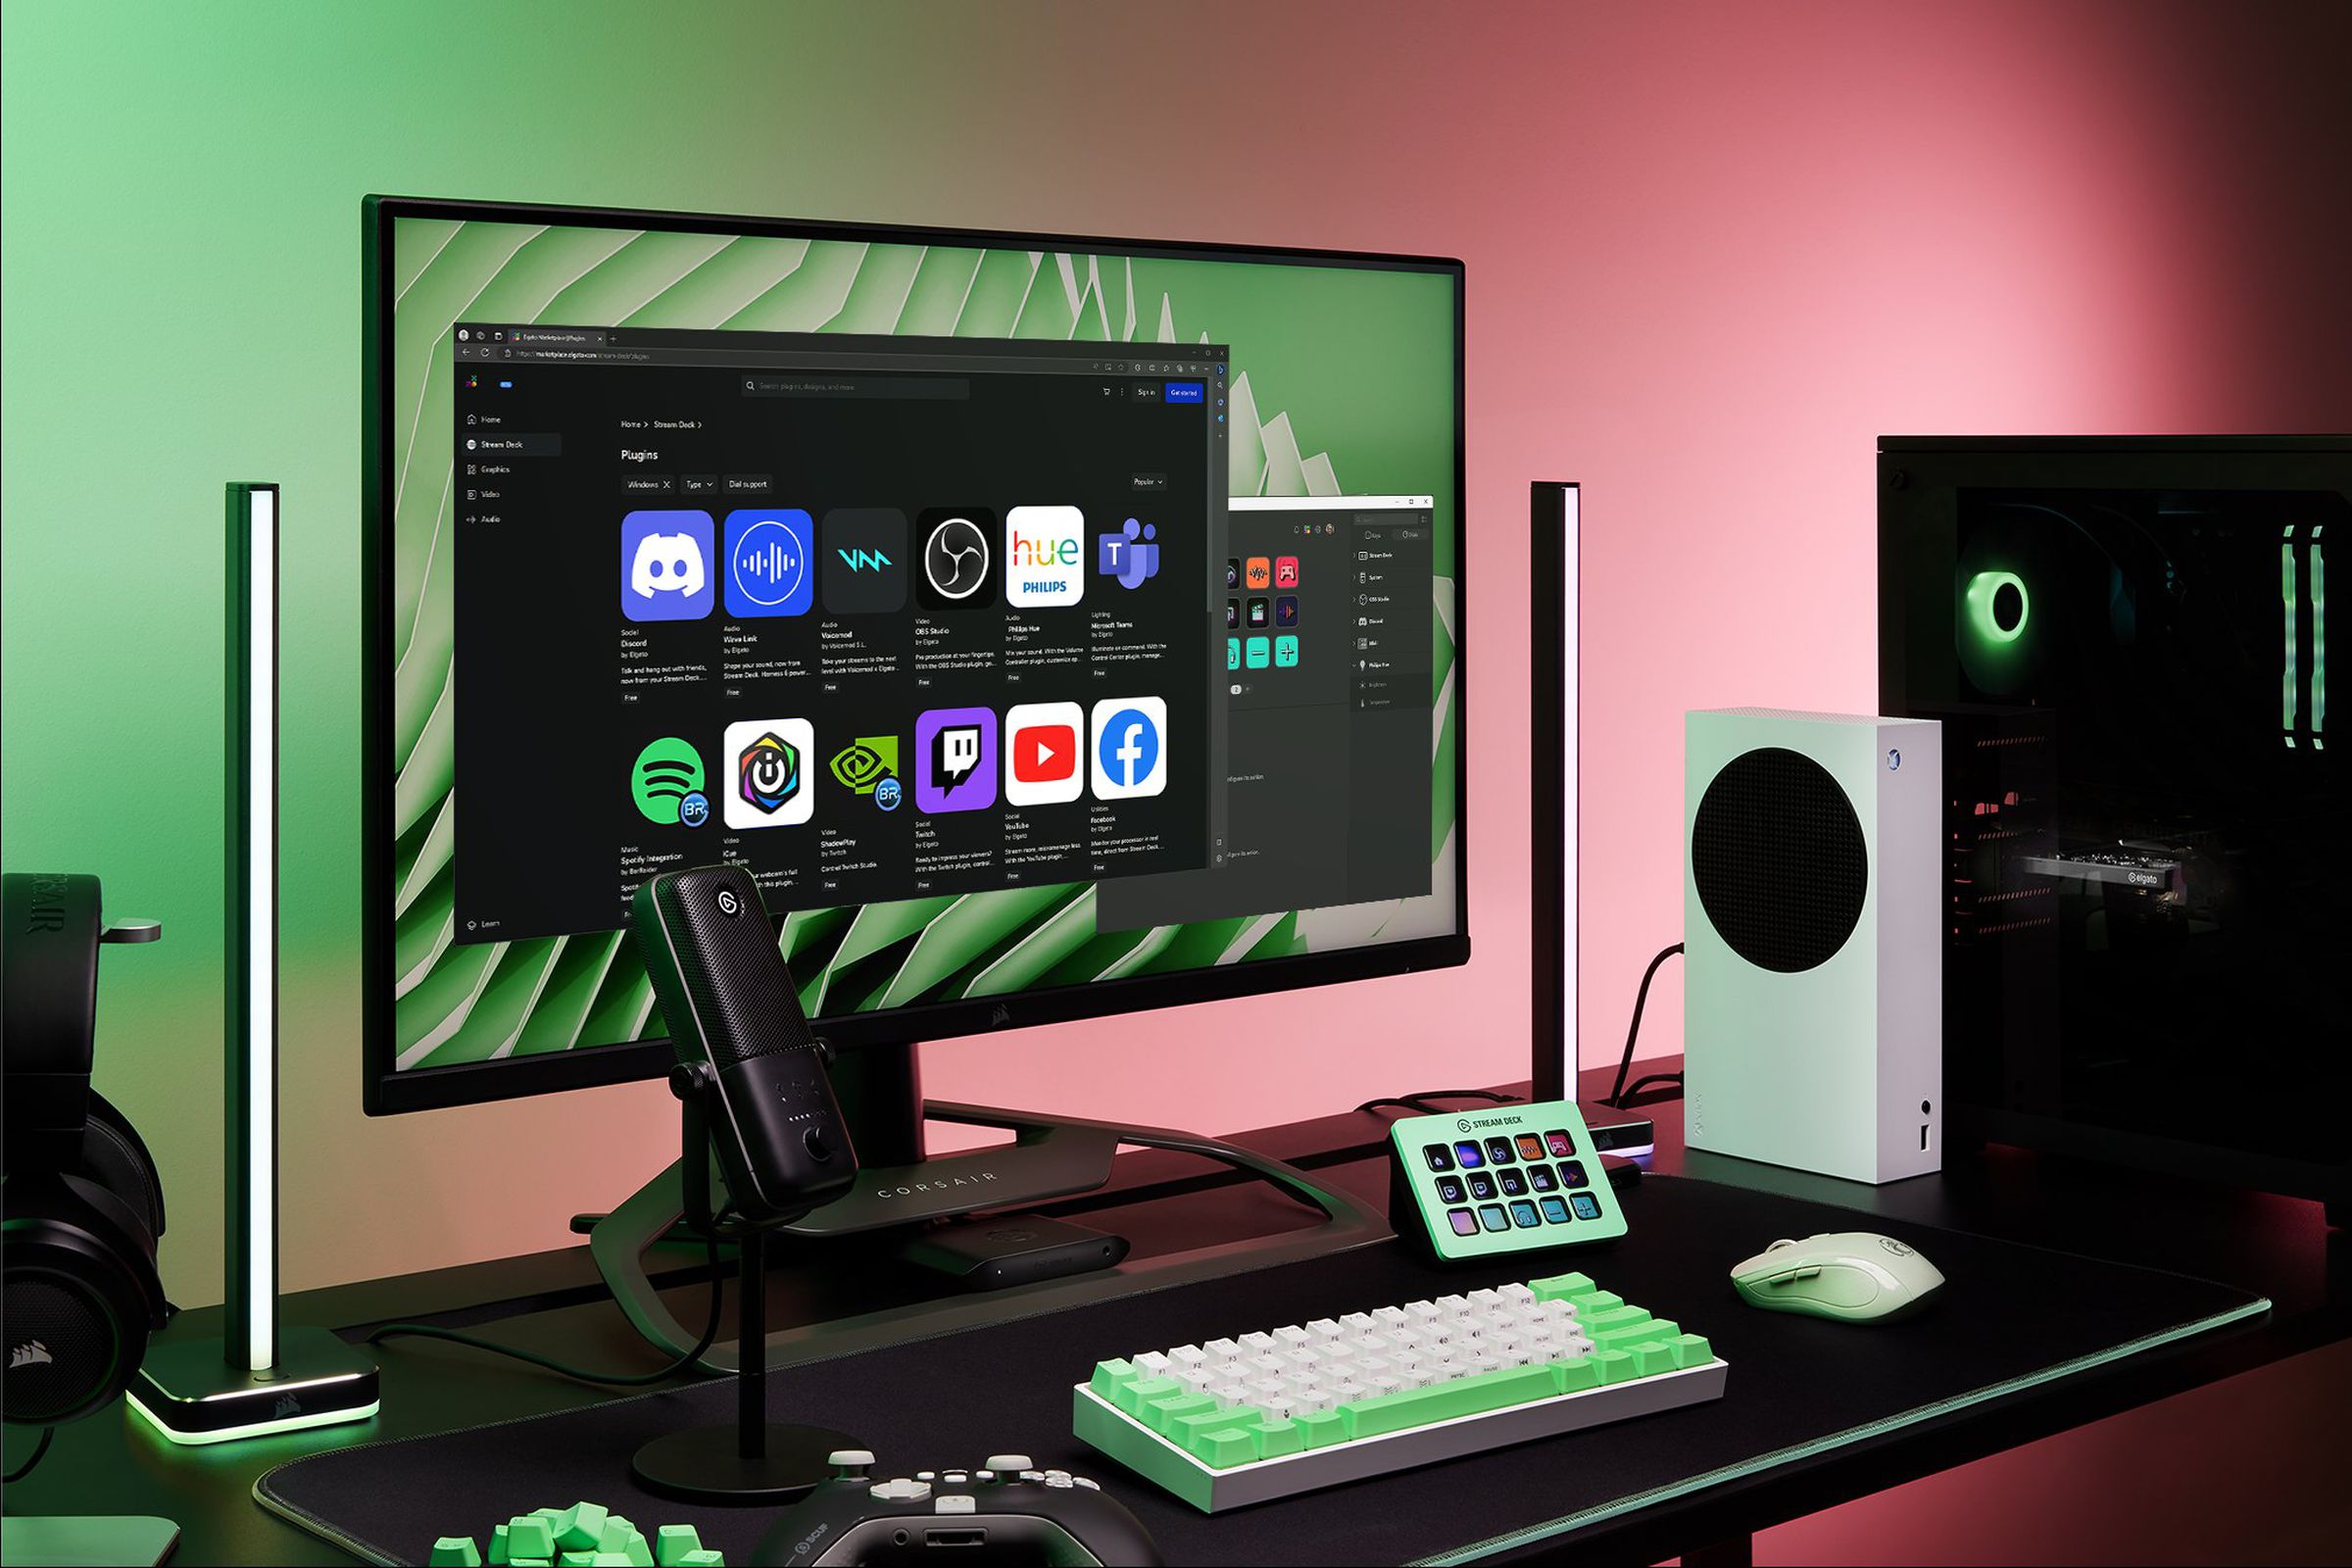 Desktop PC setup shown with gaming devices and hardware for a streamer like a microphone and lighting. On the computer screen there’s a simulated image of the Stream Deck software, and the new Elgato Marketplace with plugins for apps like Discord, Microsoft Teams, and Twitch.